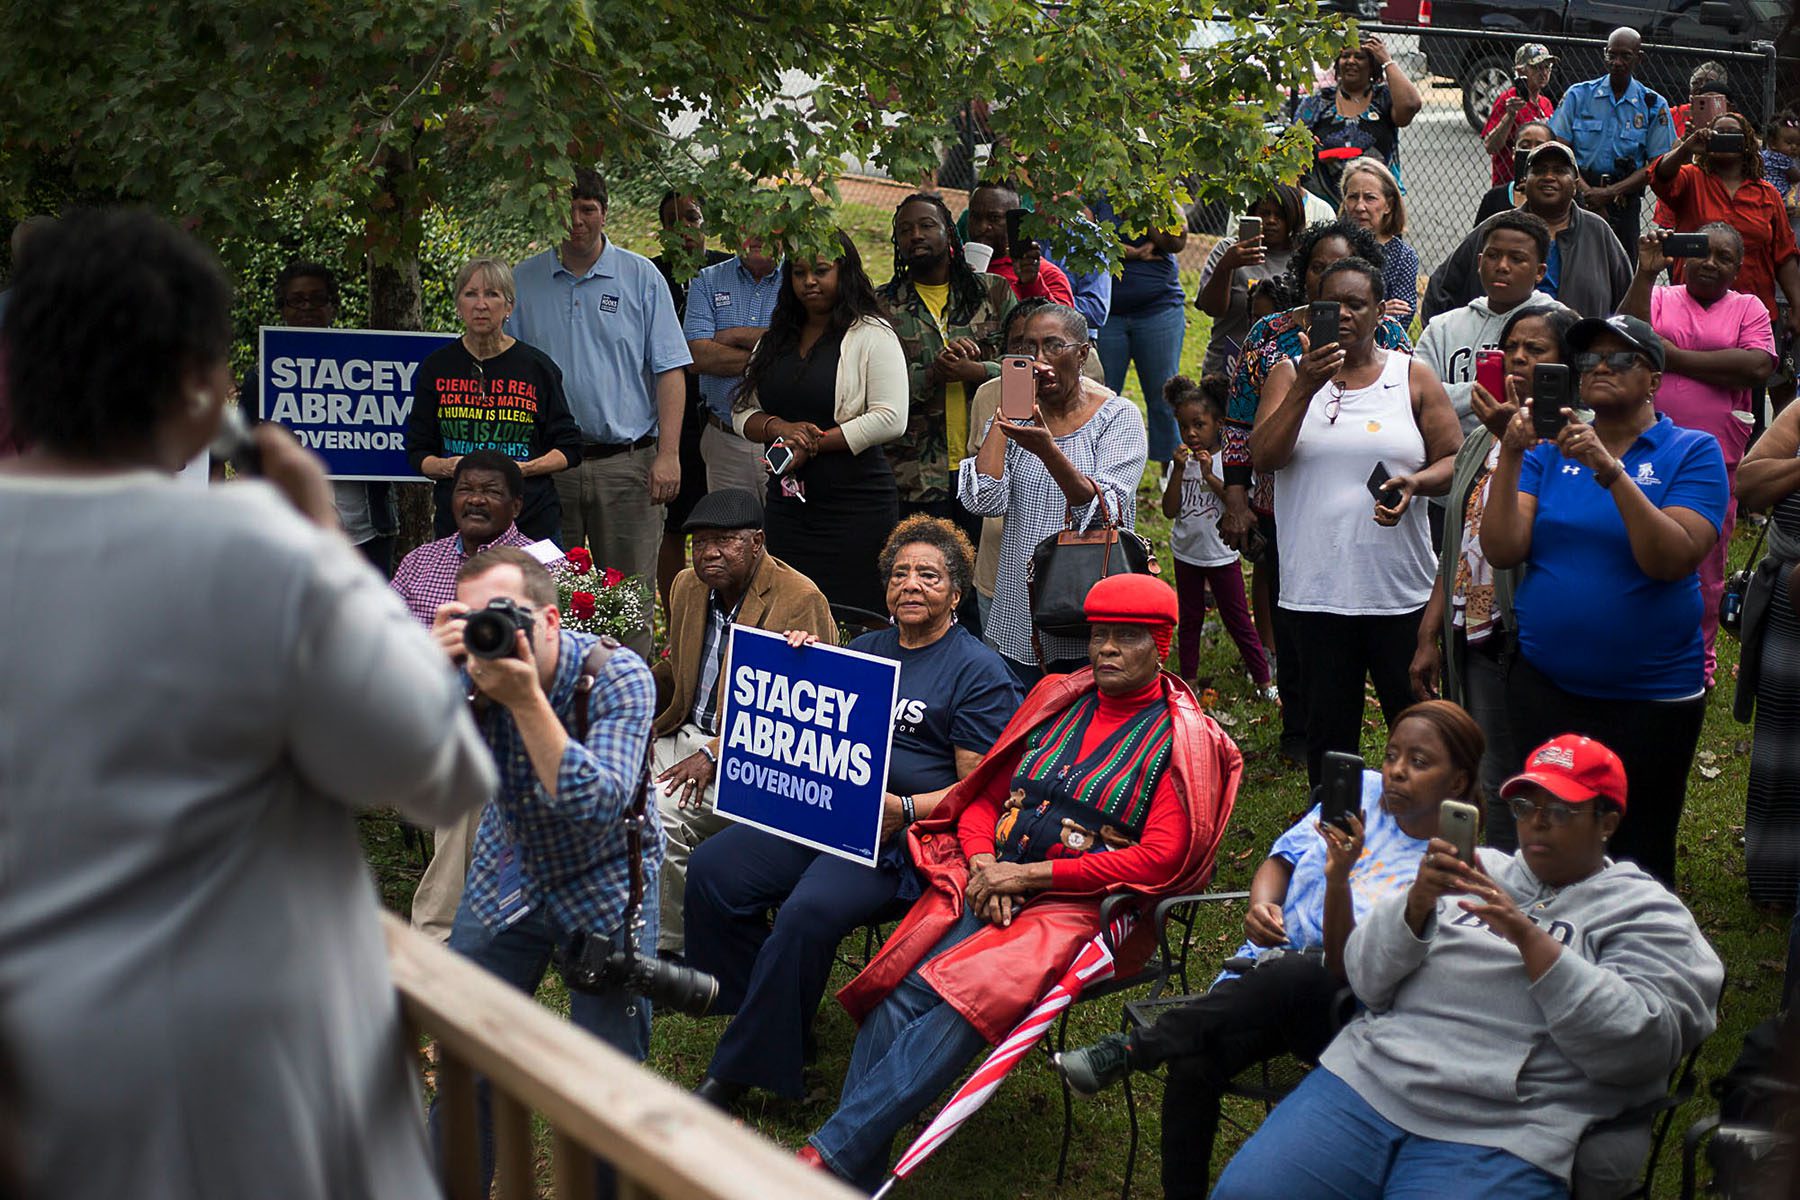 People take pictures and videos of Stacey Abrams as she speaks from the front porch of a small restaurant.